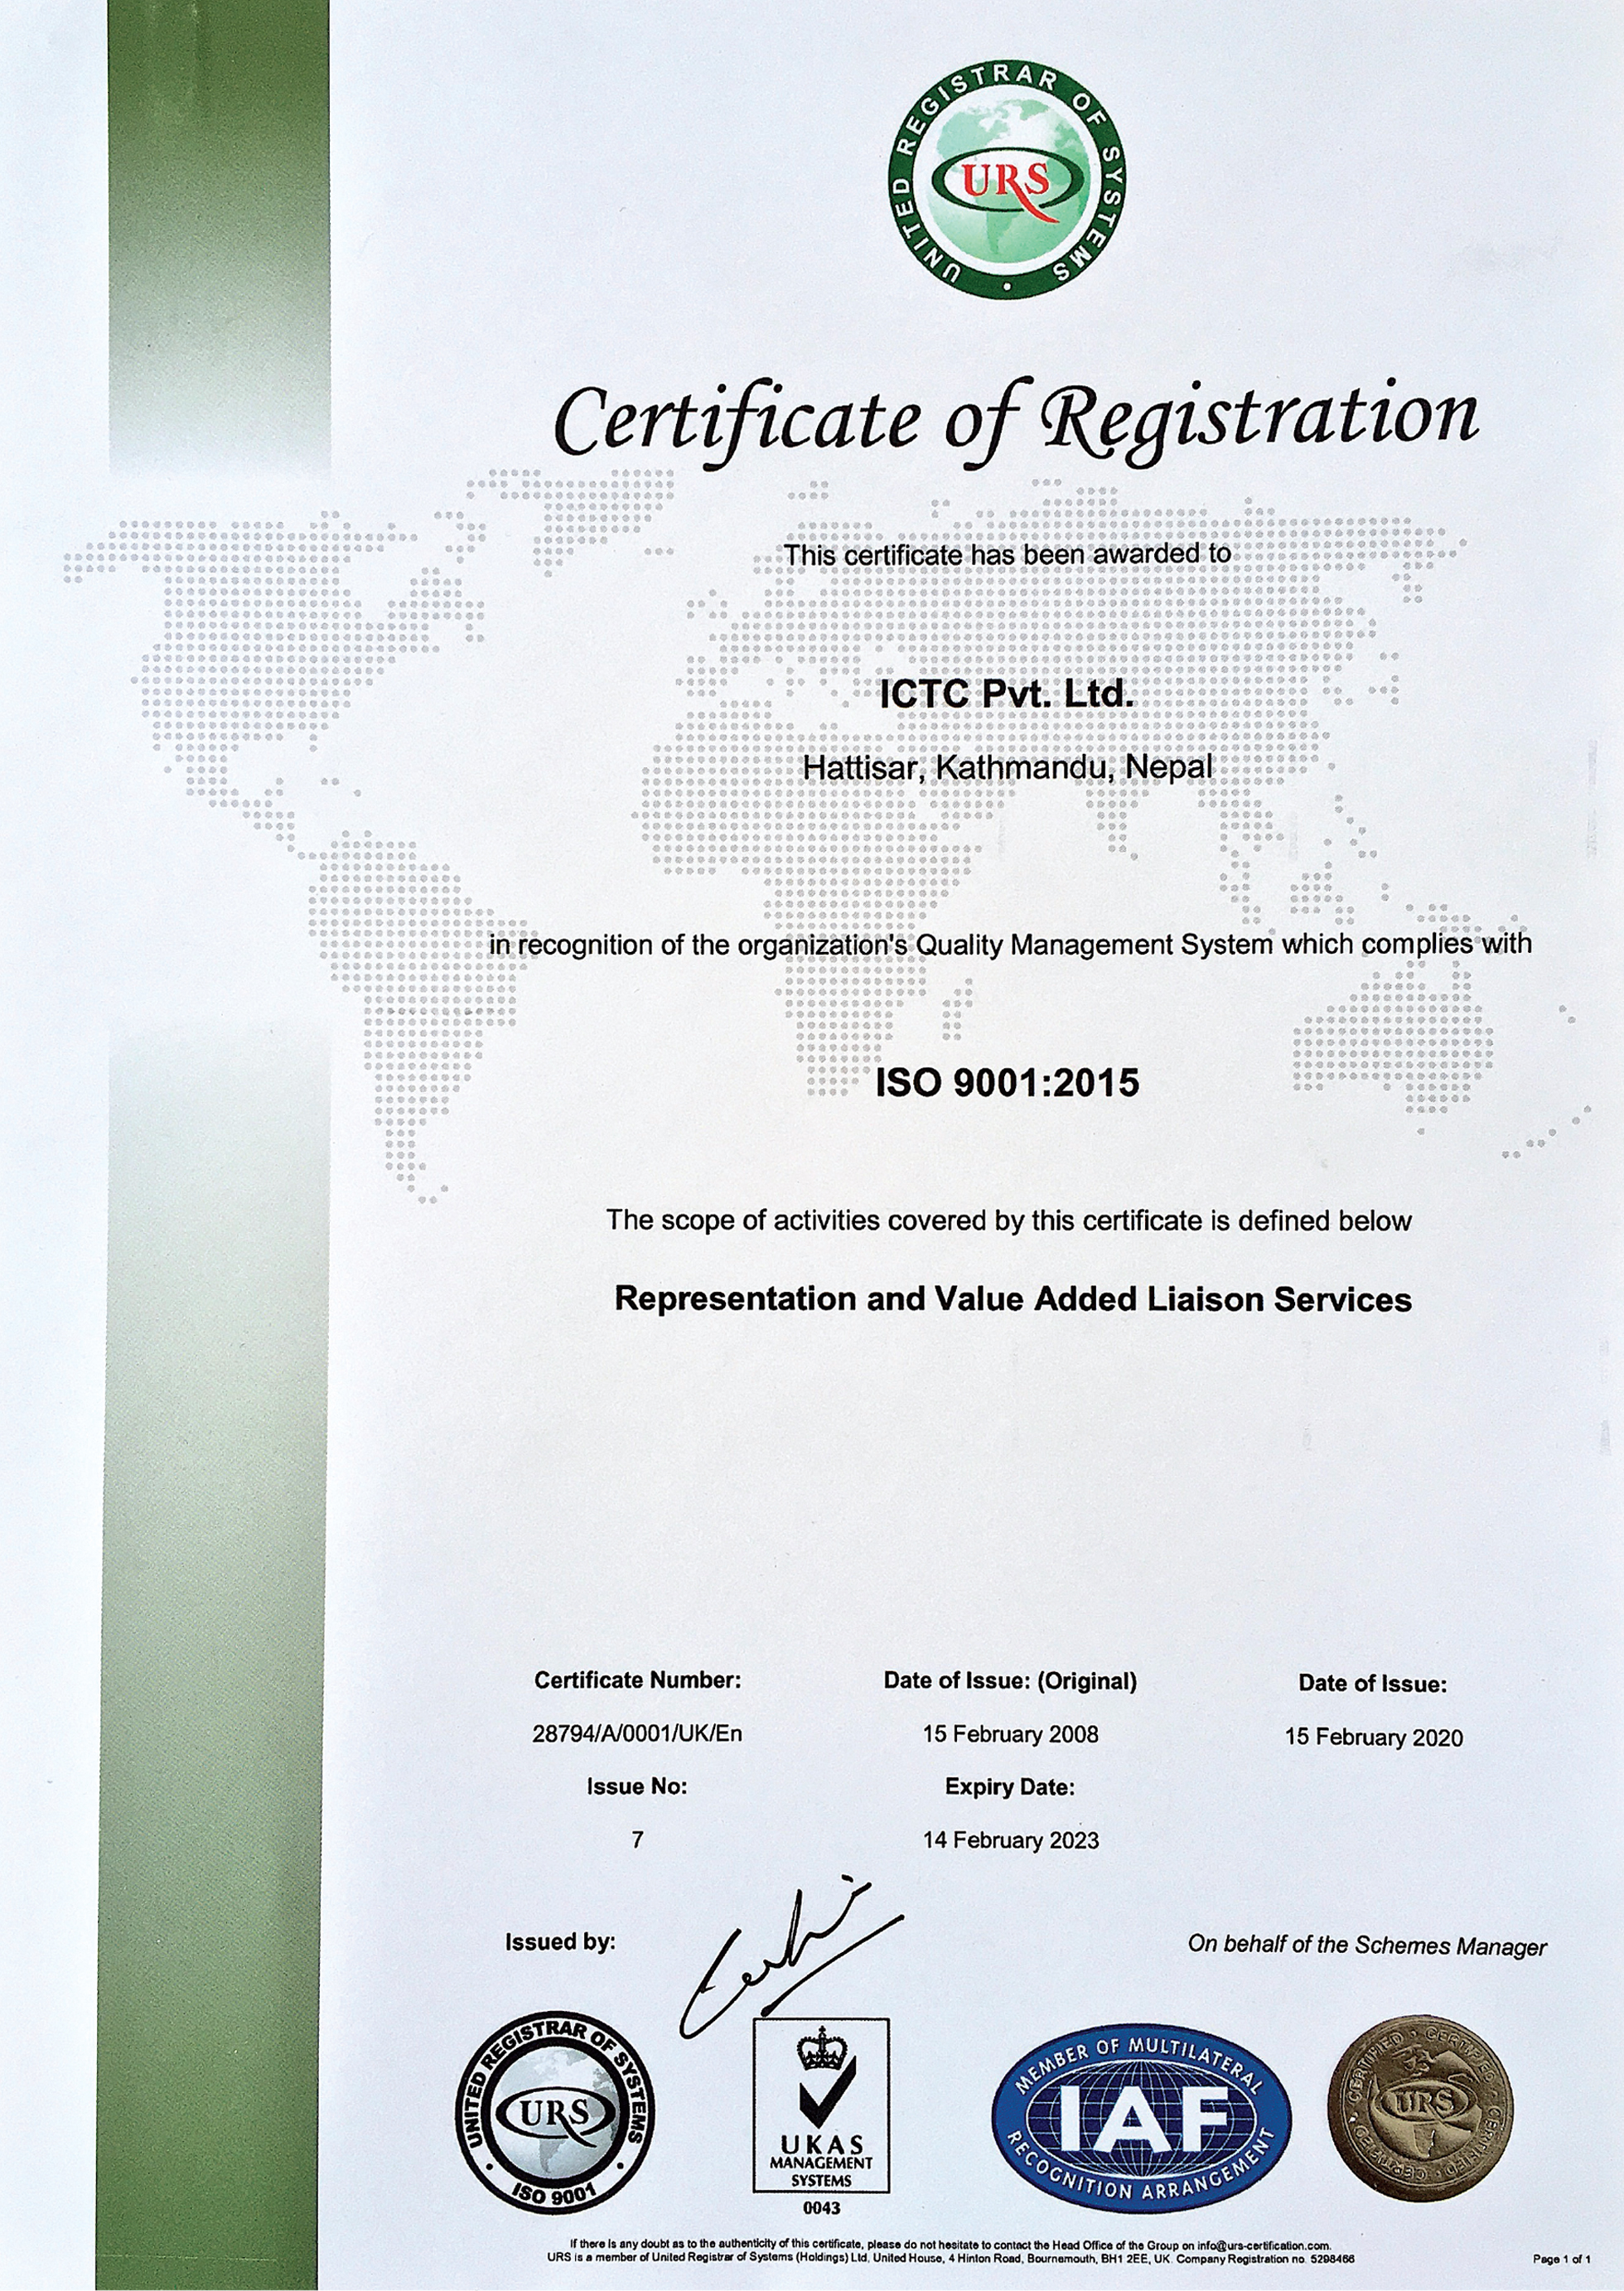 ISOCertificate